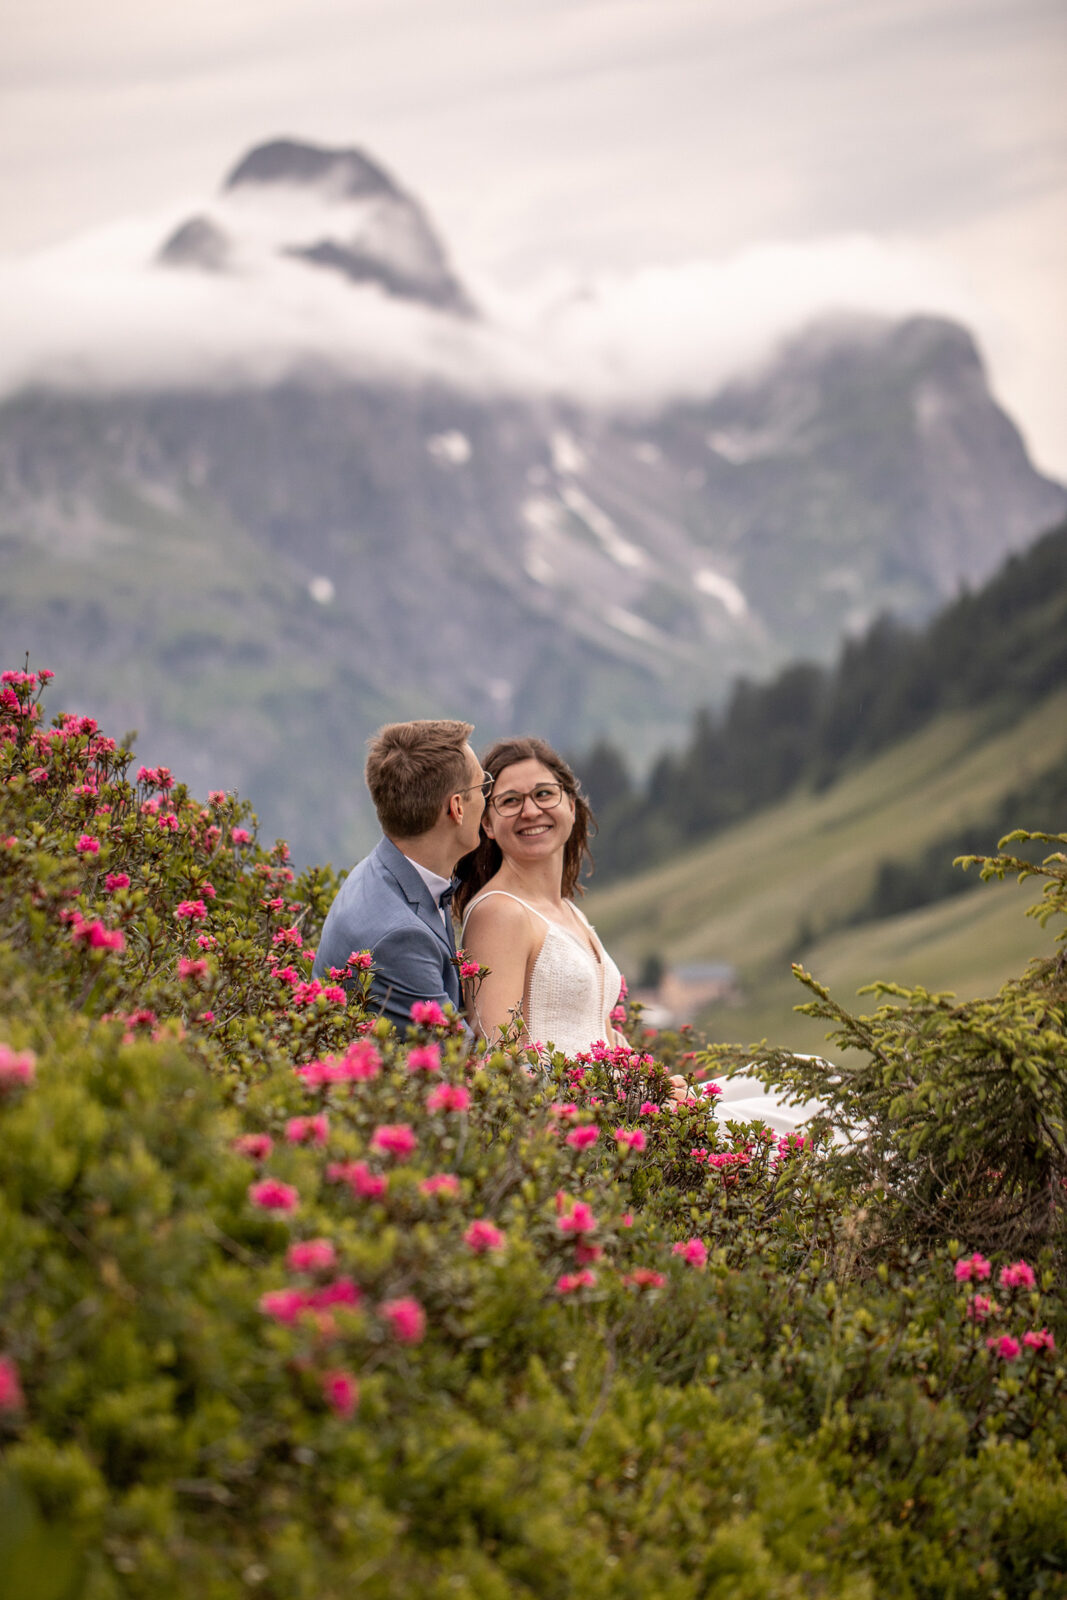 After wedding photos in the austrian alps